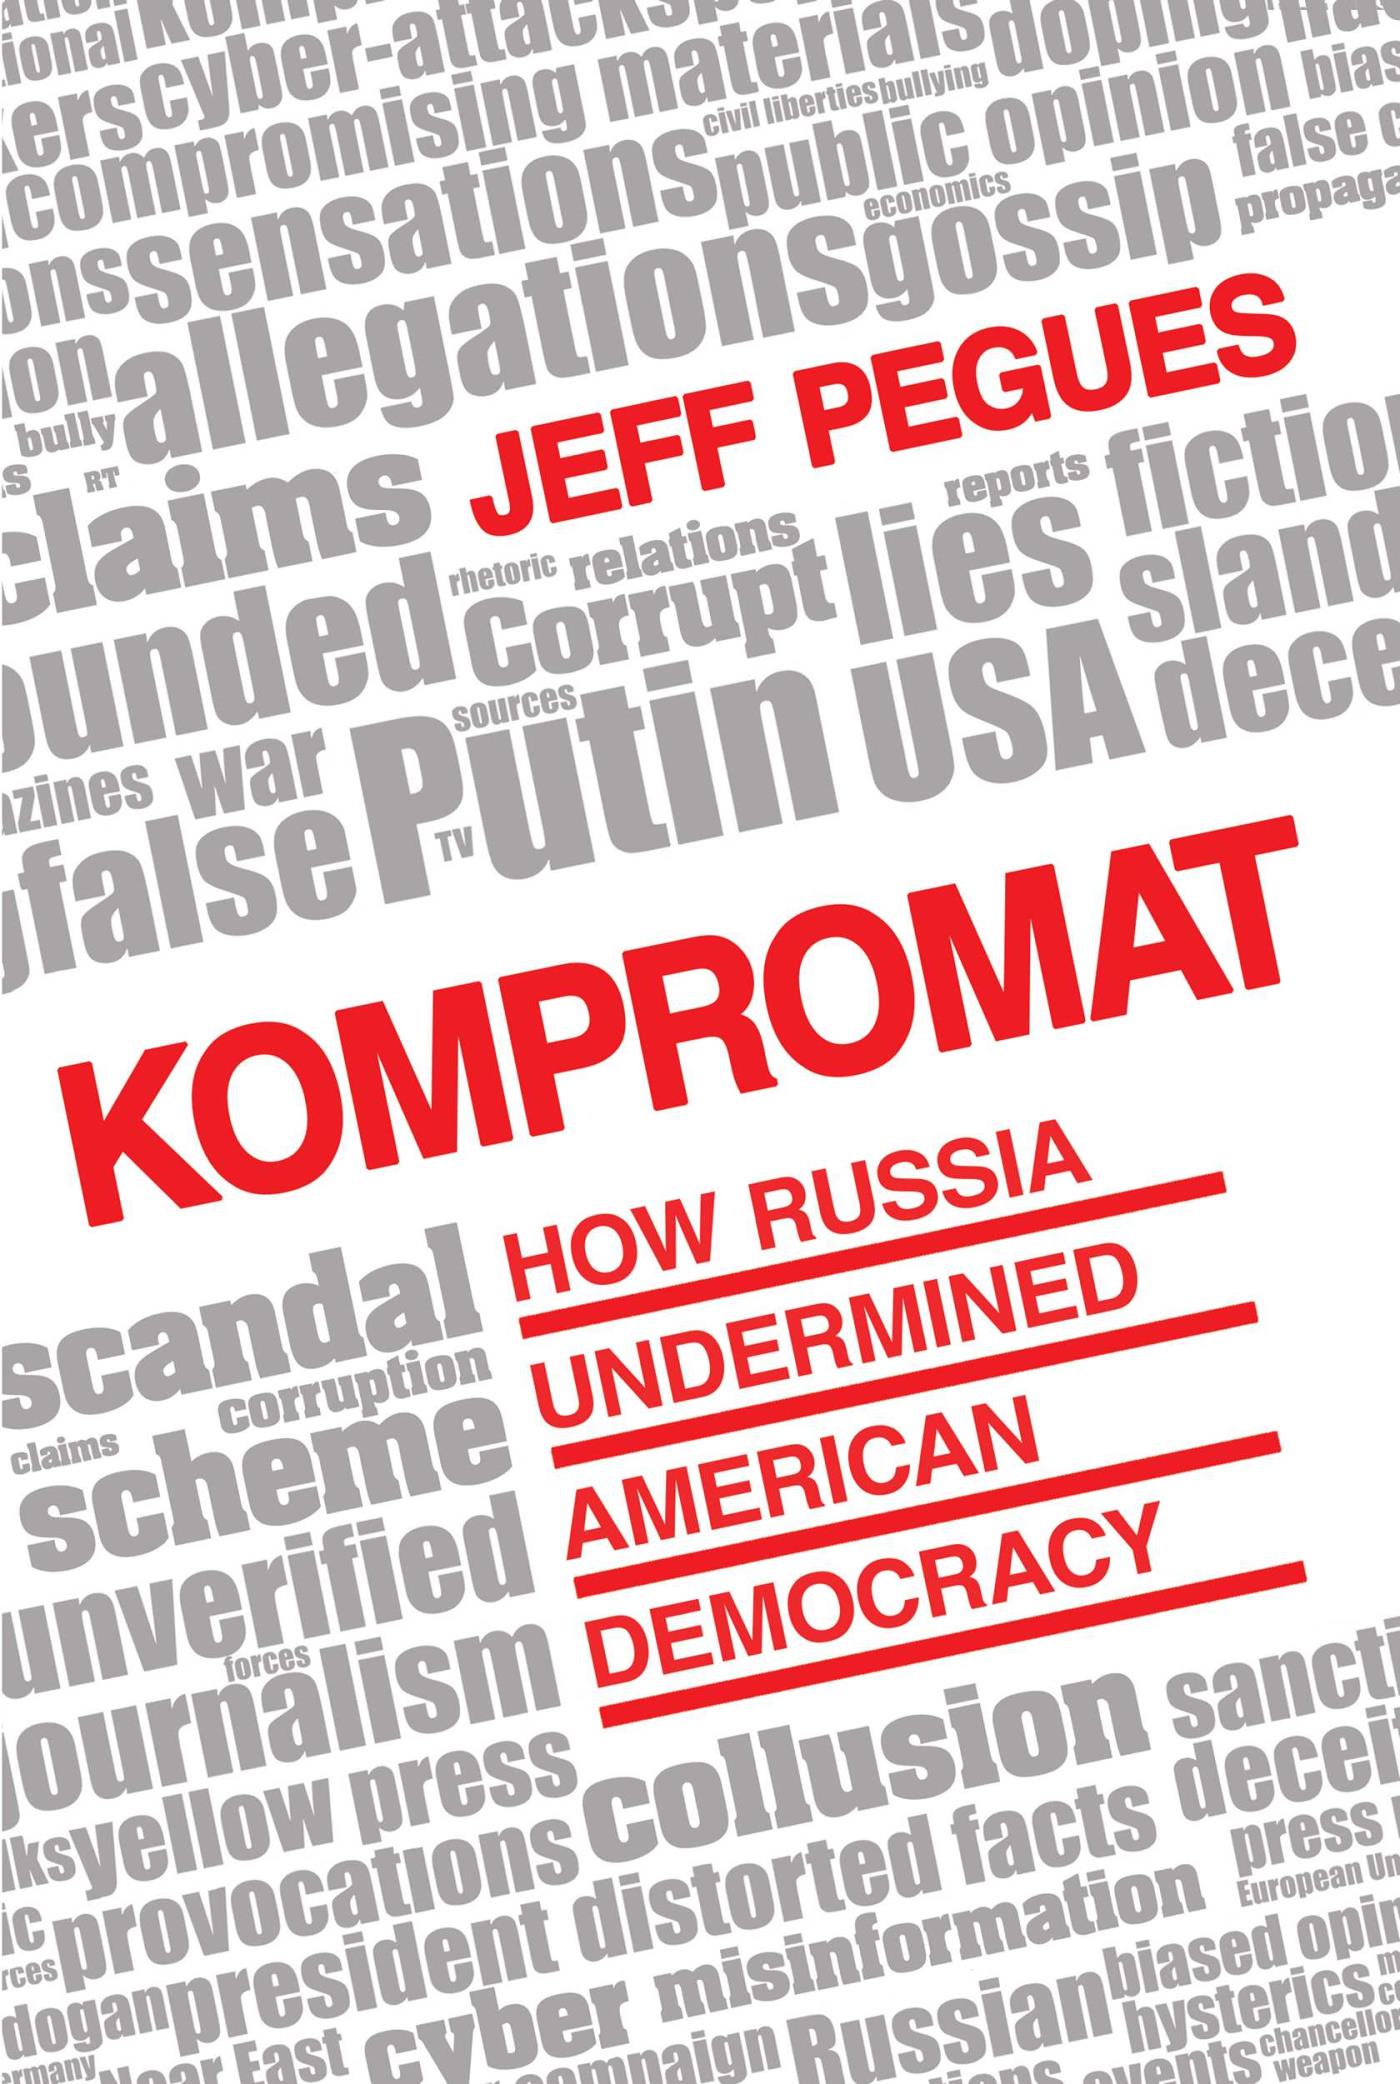 Kompromat how Russia undermined American democracy cover image